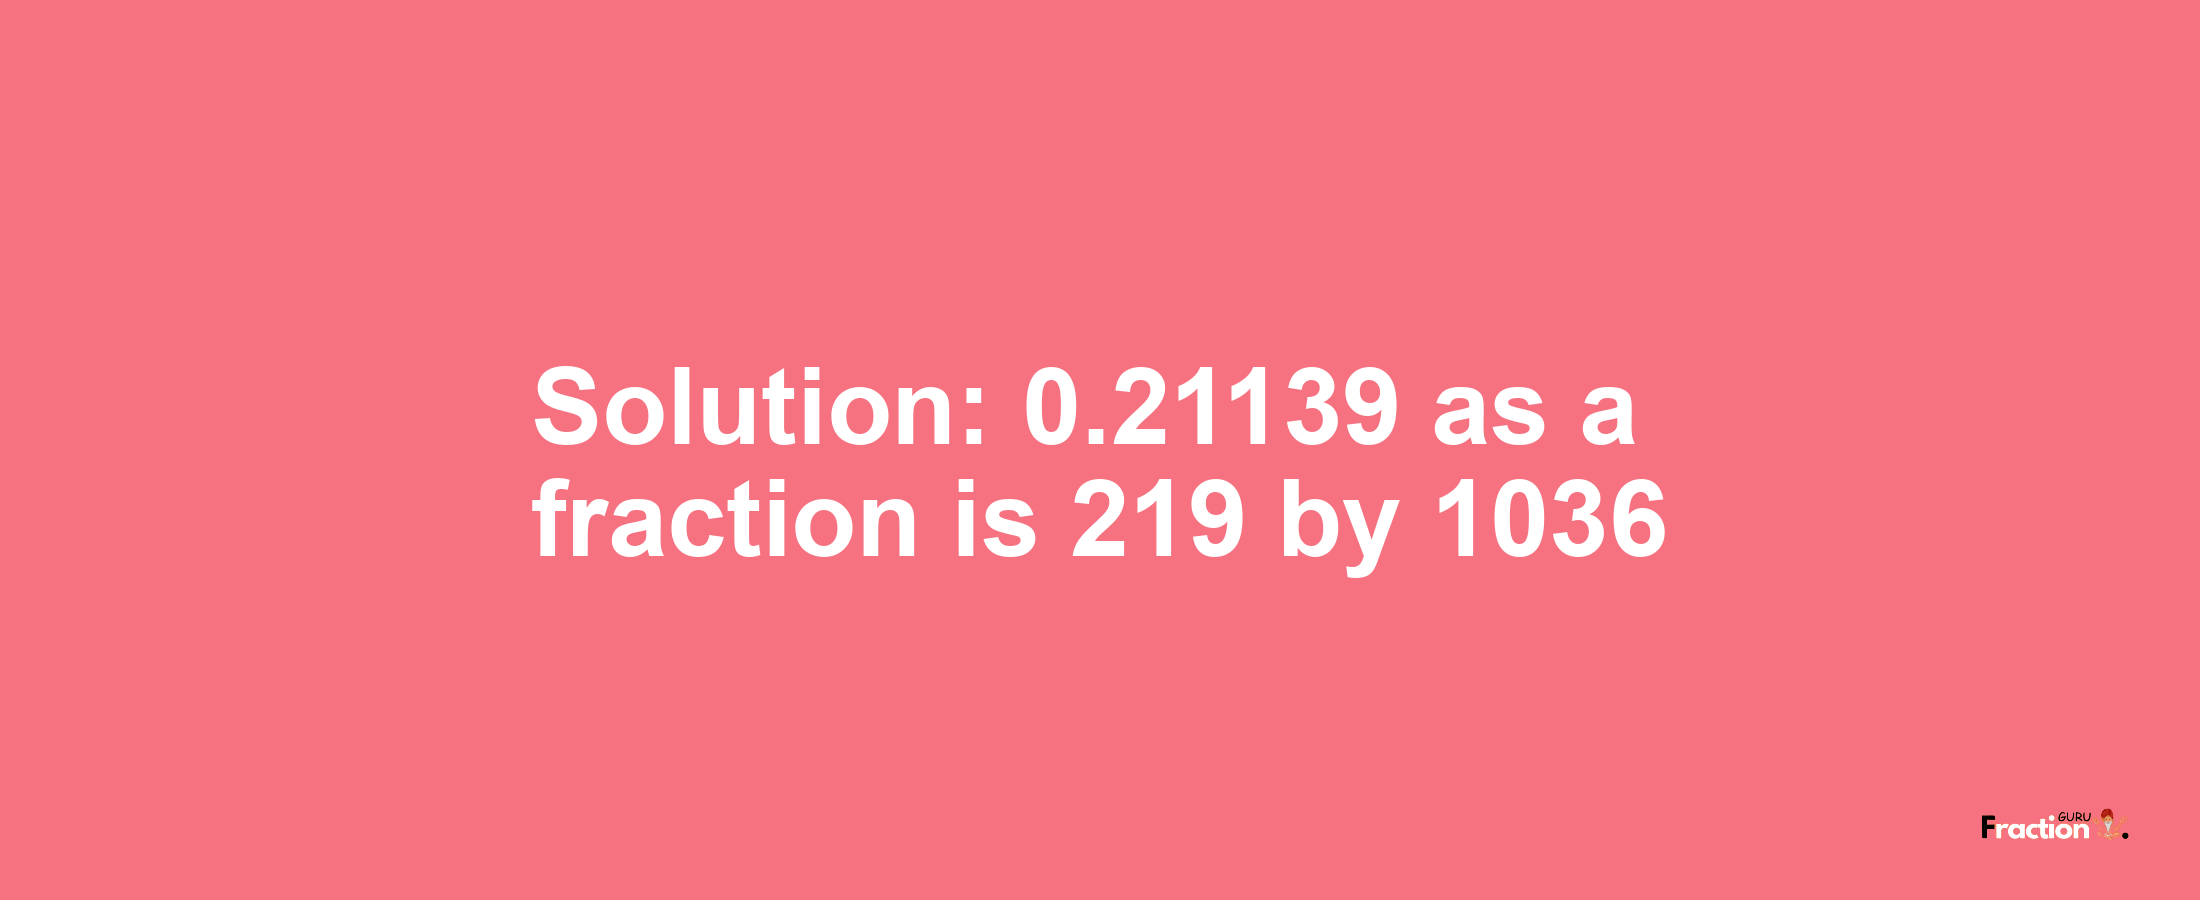 Solution:0.21139 as a fraction is 219/1036